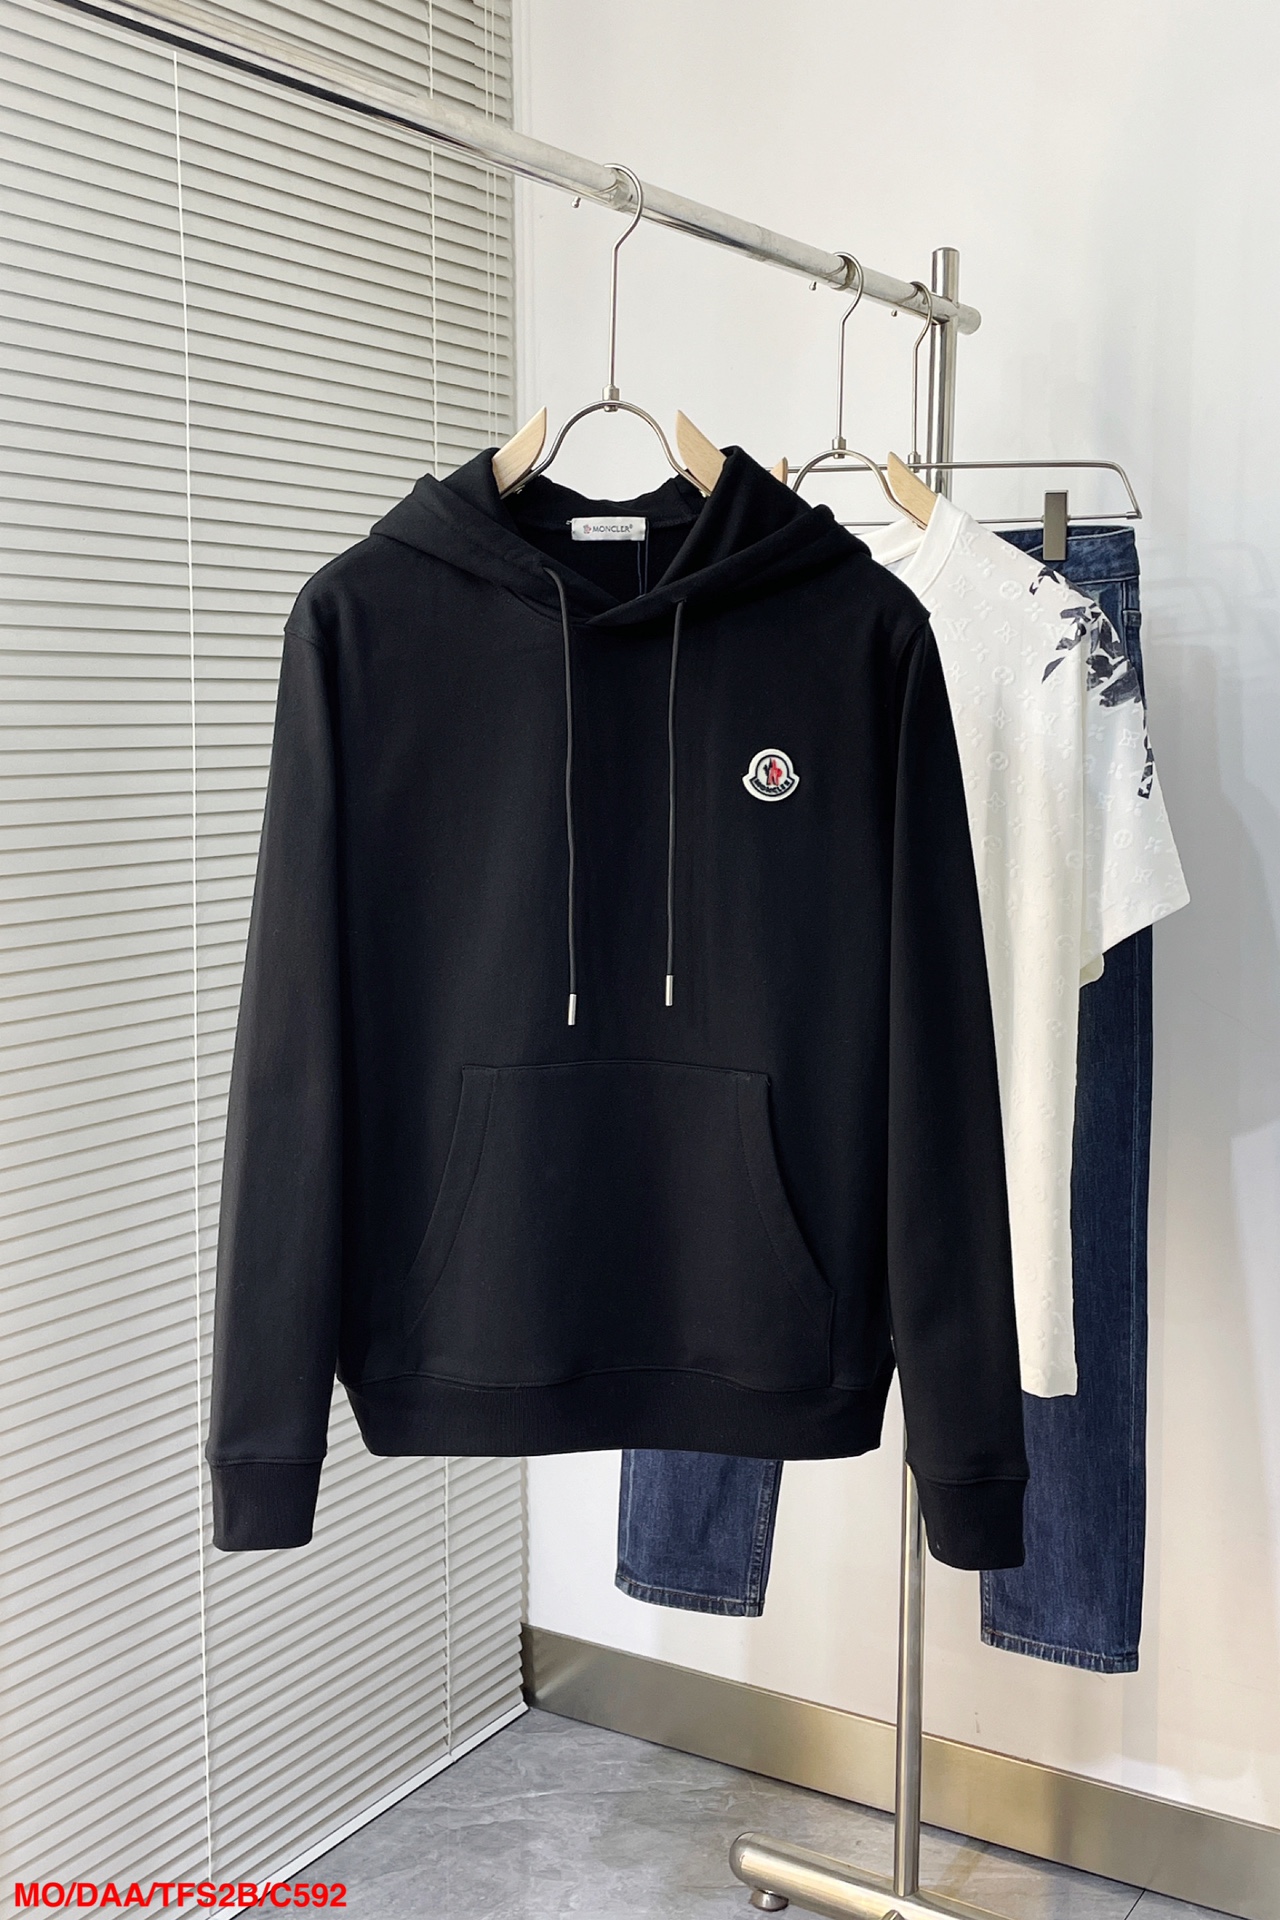 Moncler Clothing Hoodies Embroidery Cotton Fashion Hooded Top